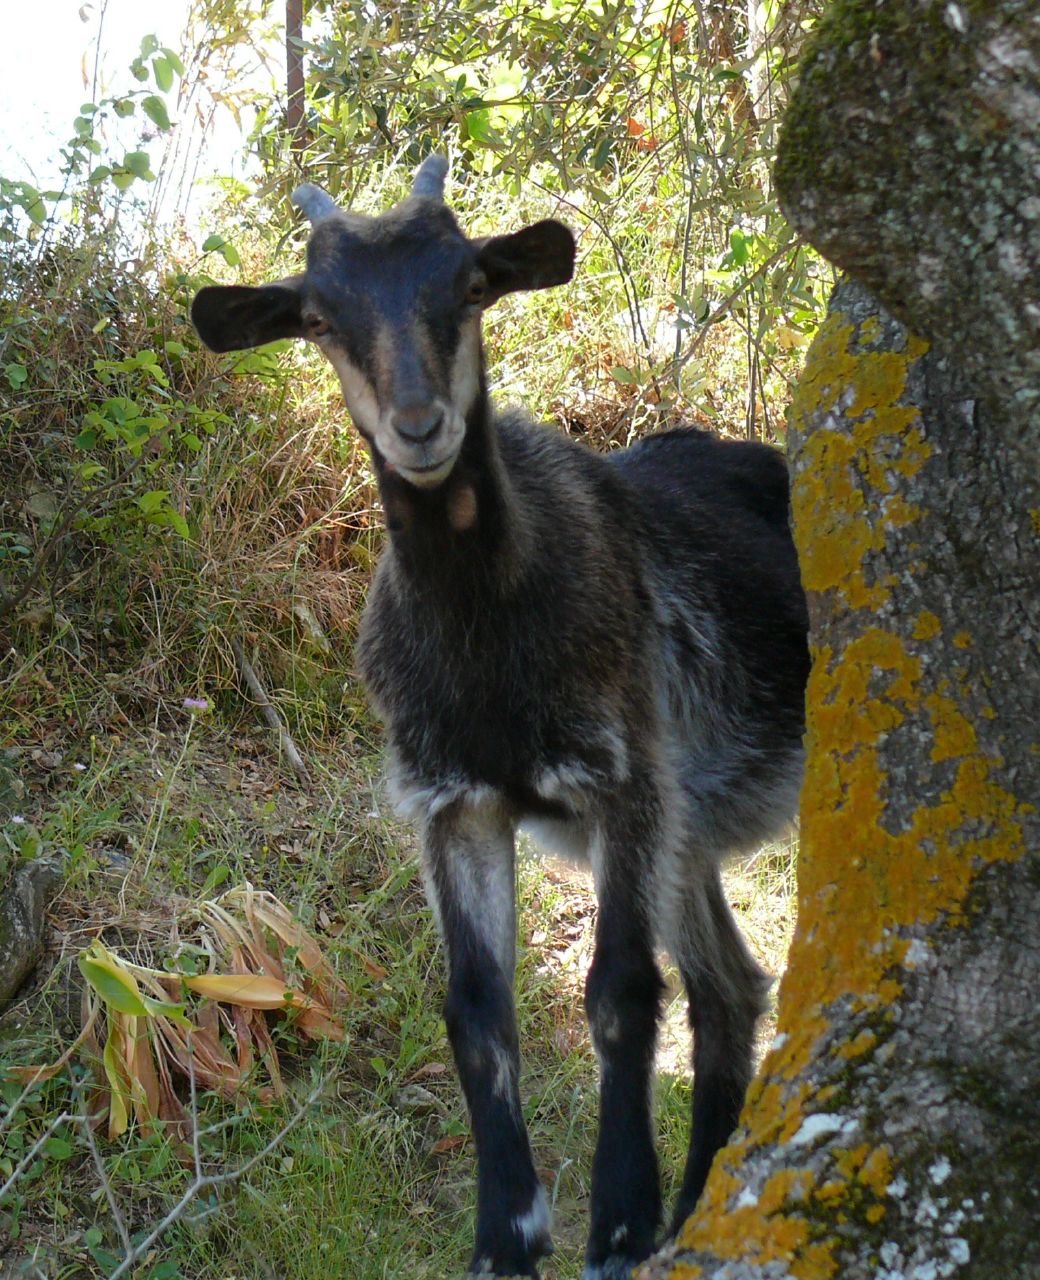 a very cute small goat standing by a tree